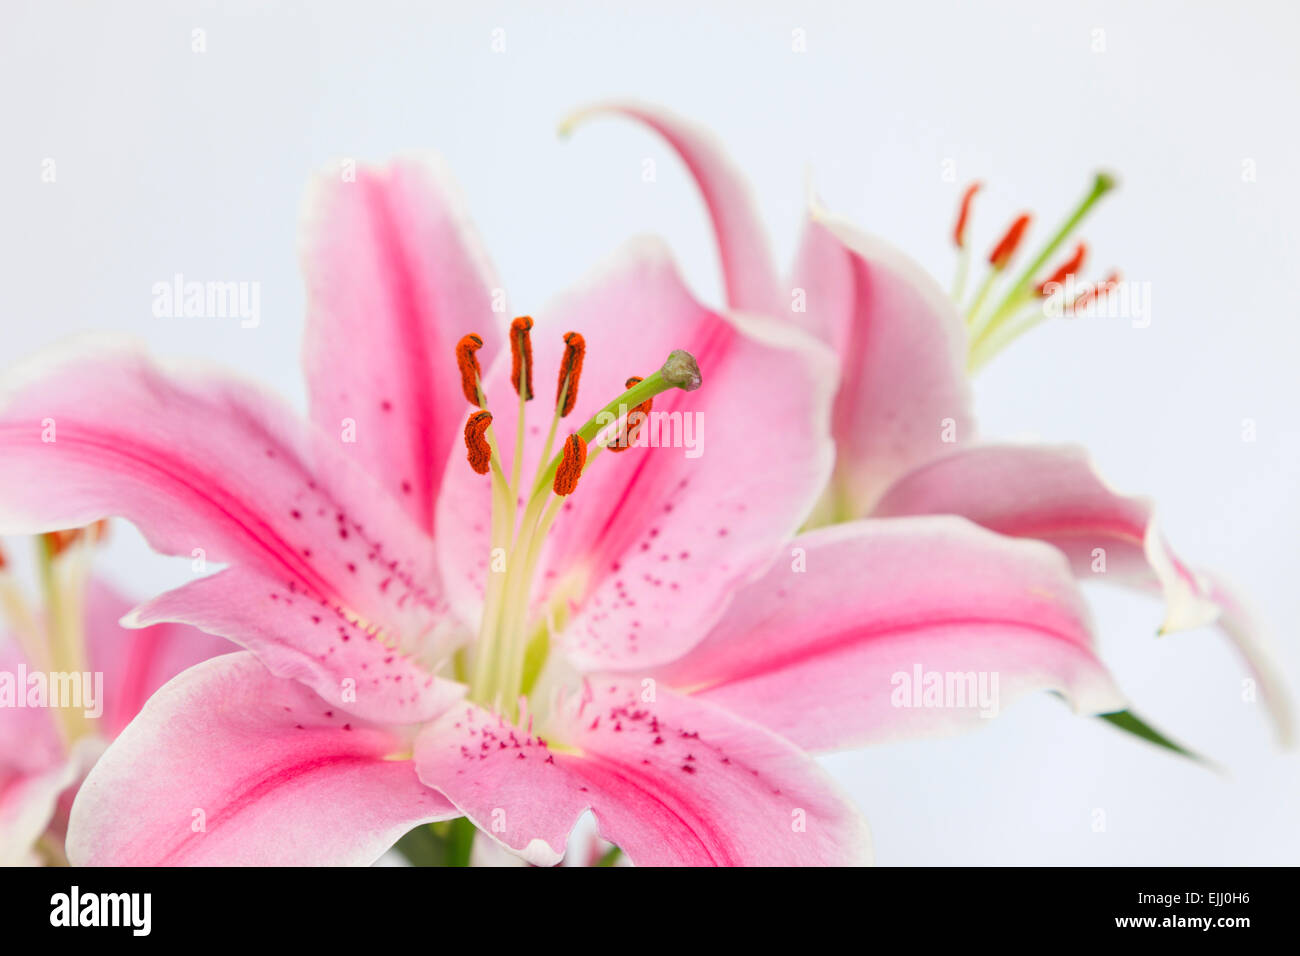 Pink Lily flowers in close-up focused on the anthers on a plain white background. Stock Photo